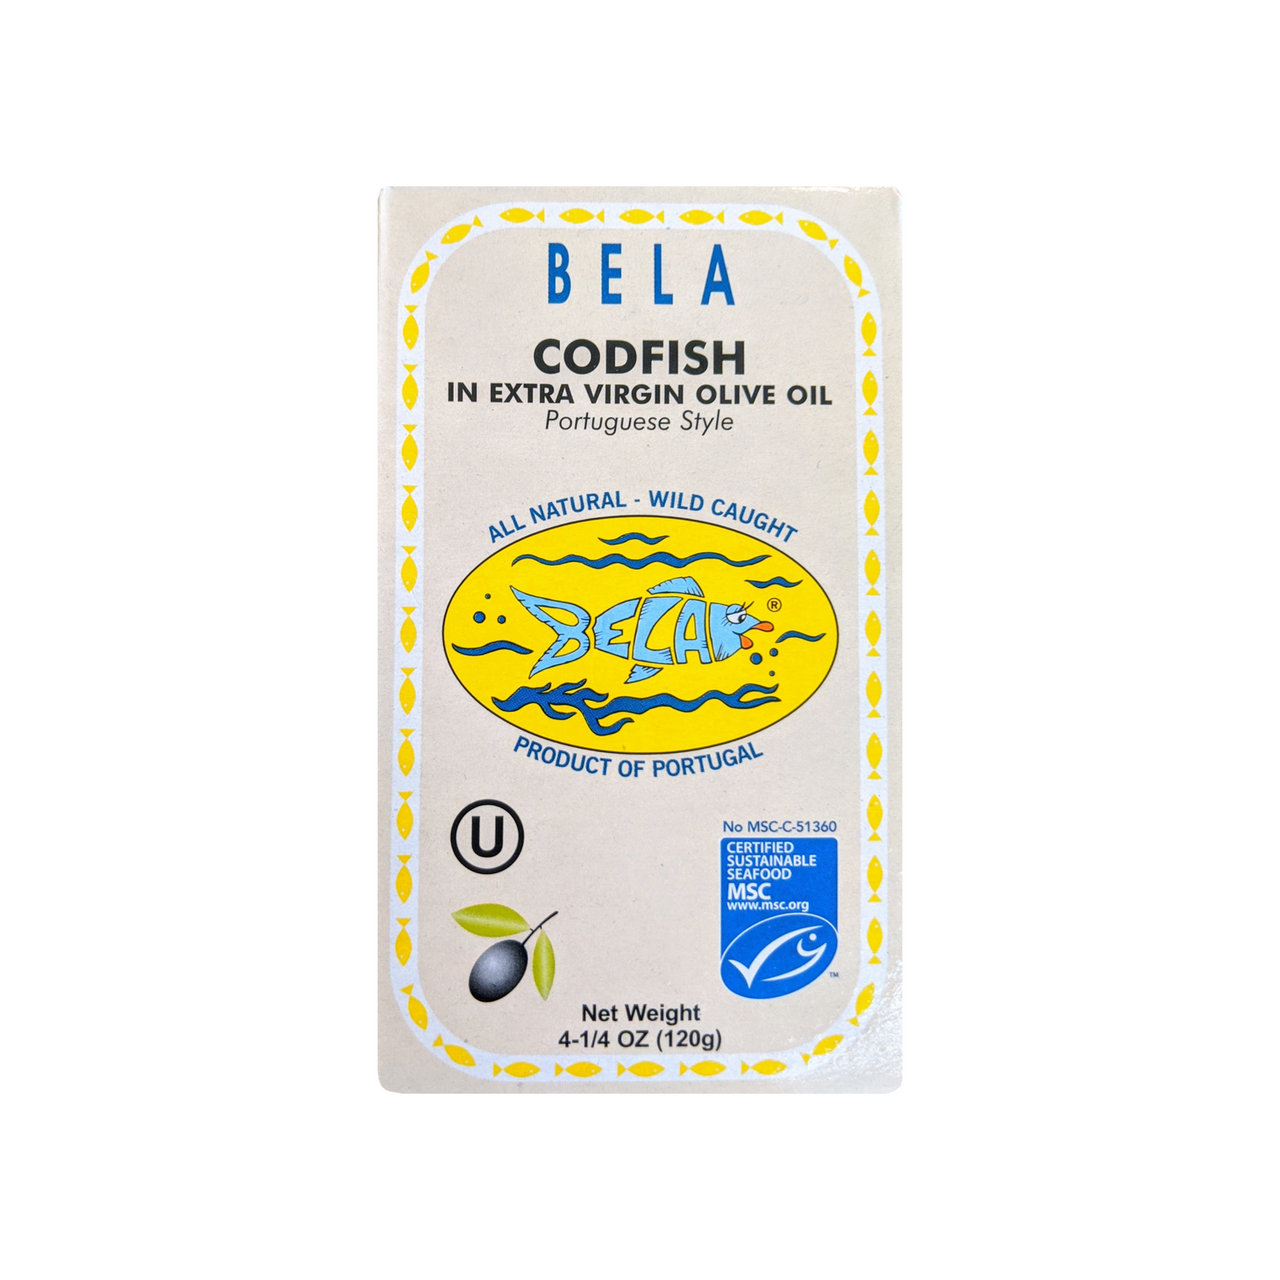 Bela Codfish in Extra Virgin Olive Oil, Portuguese Style - 6 Pack - TinCanFish